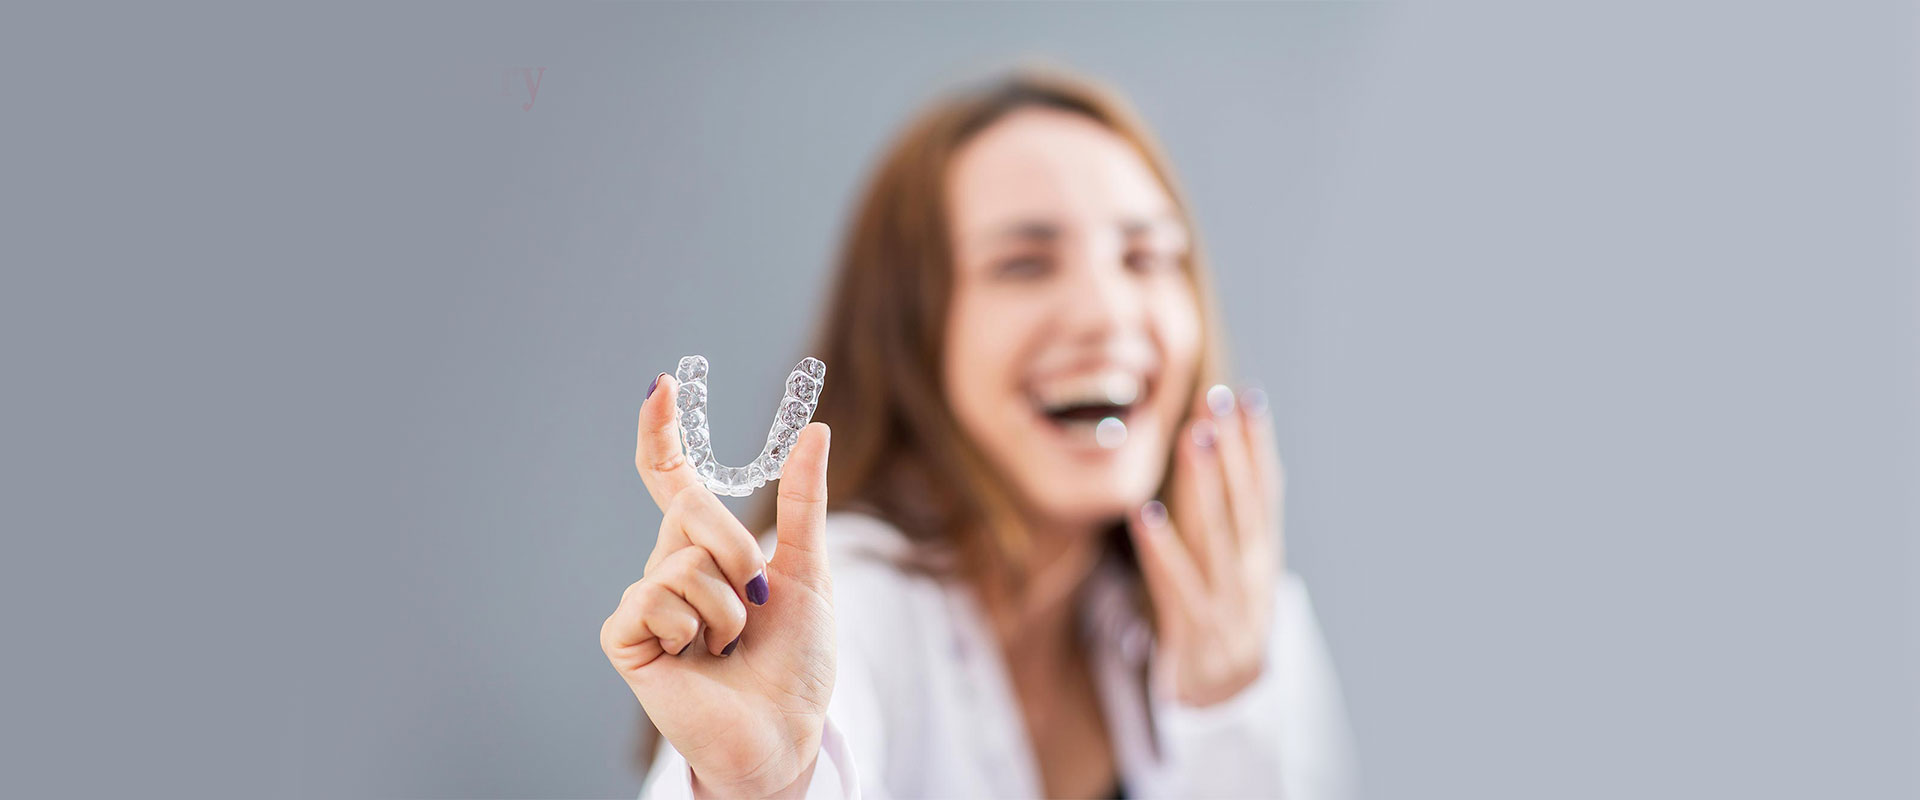 Clear Aligners: Smile Brightly Confident